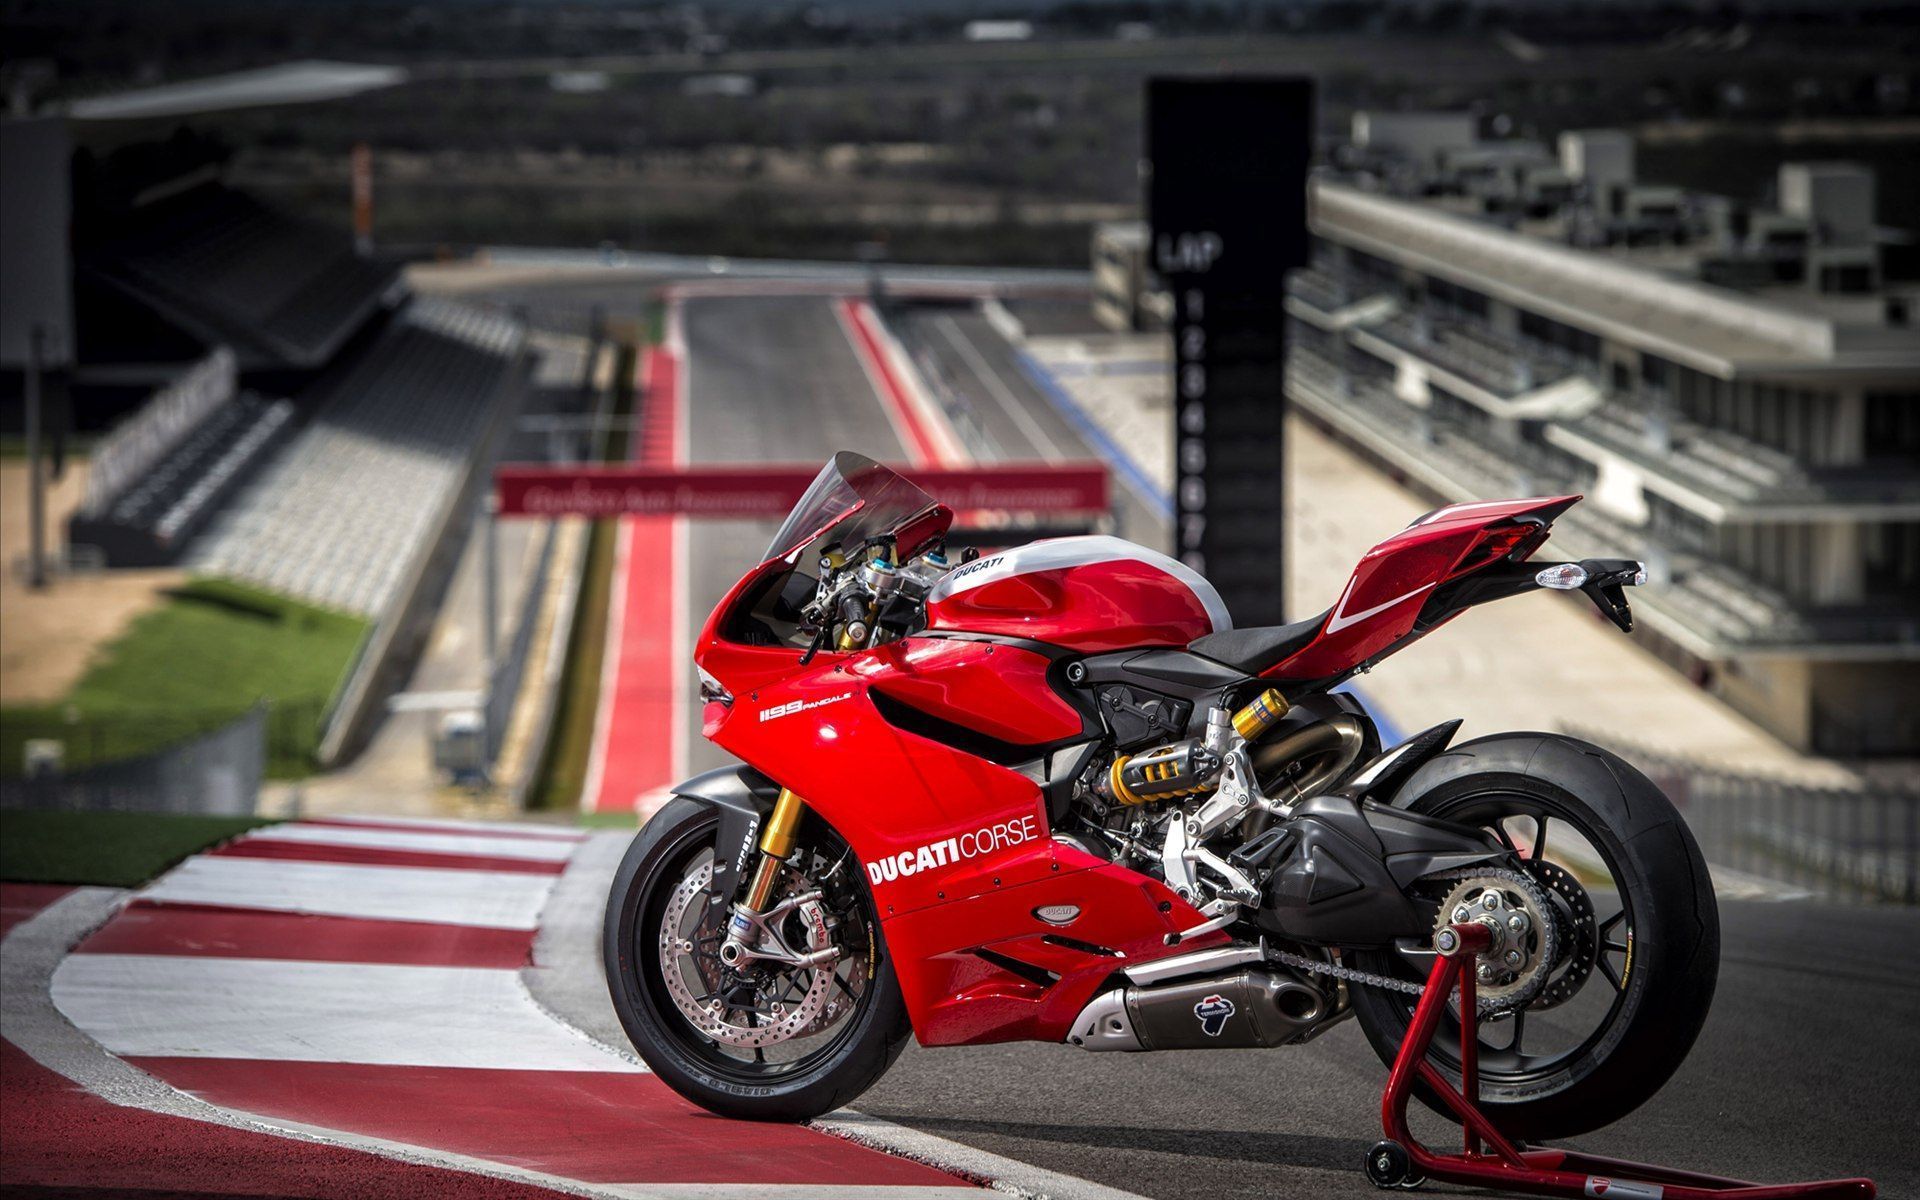 2013 Ducati Superbike 1199 Panigale R Wallpapers | HD Wallpapers